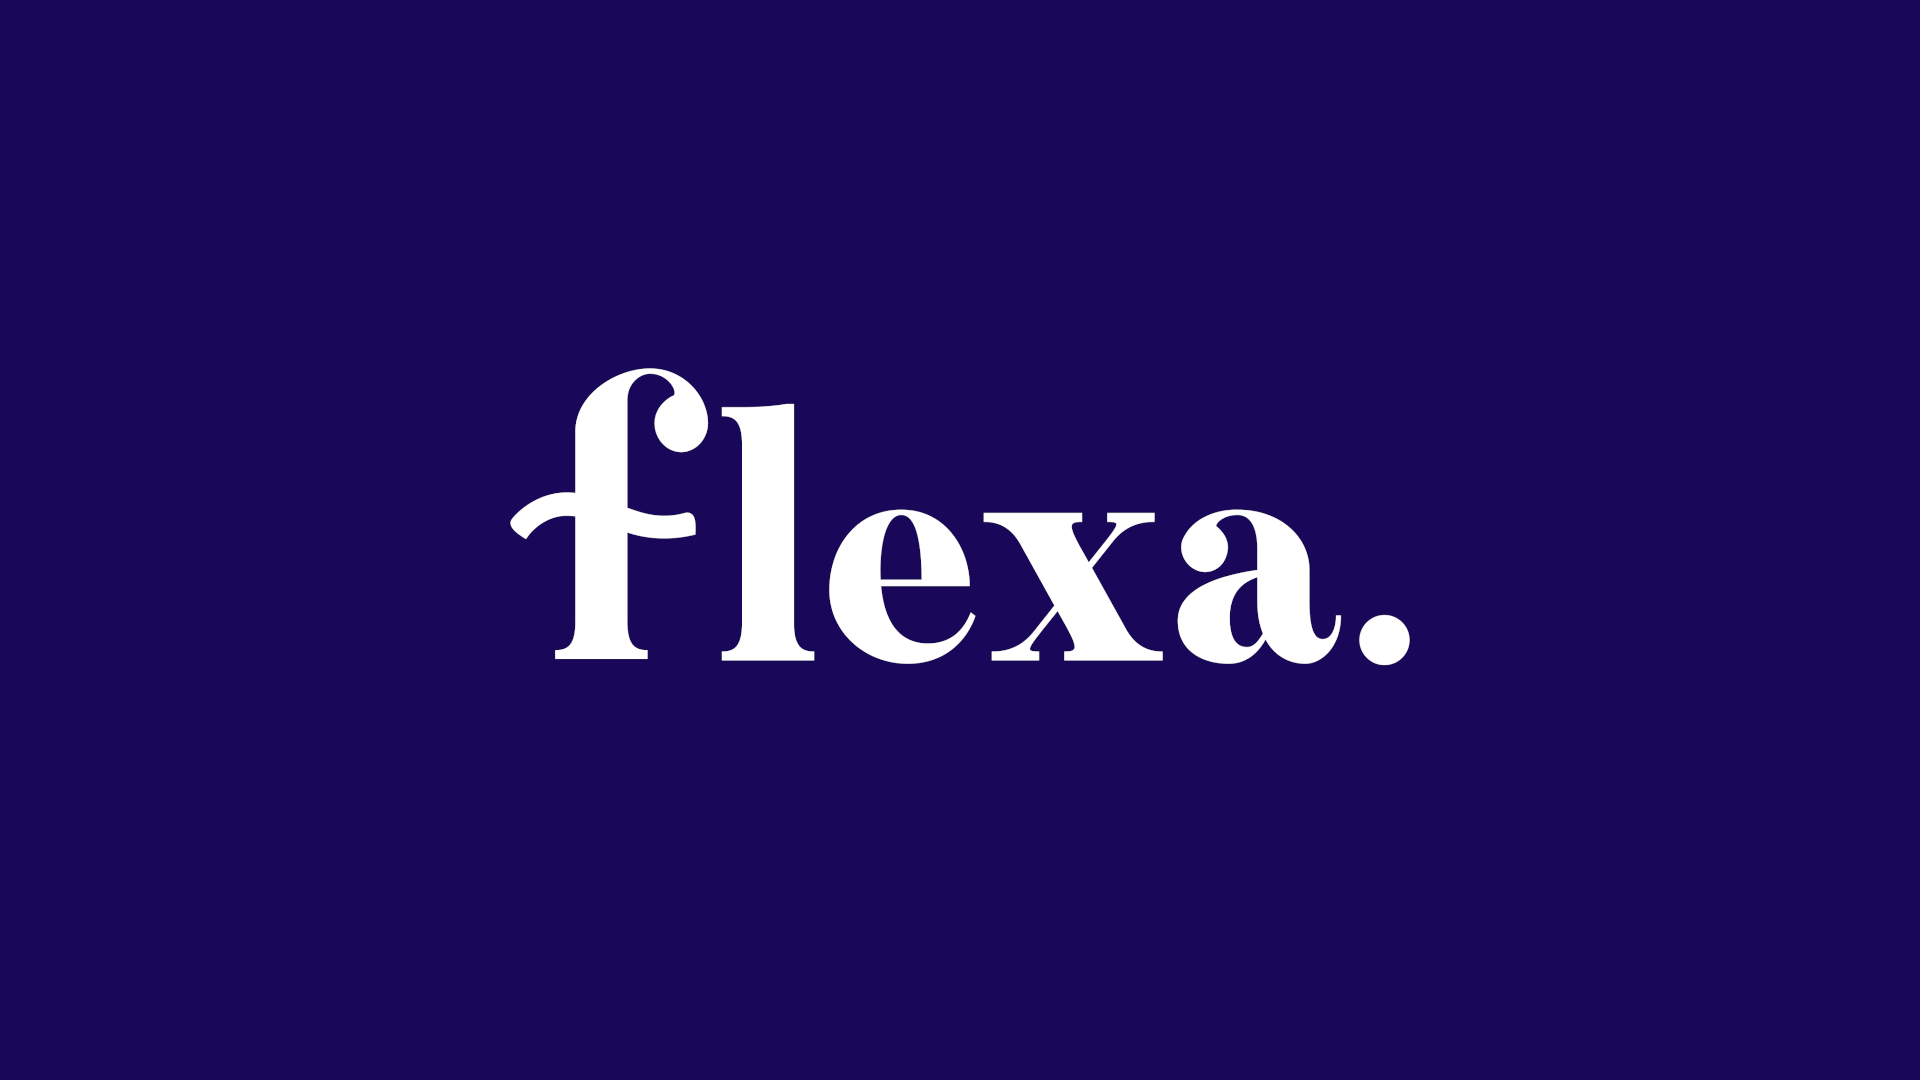 Flexa | The most flexible companies to work for, certified